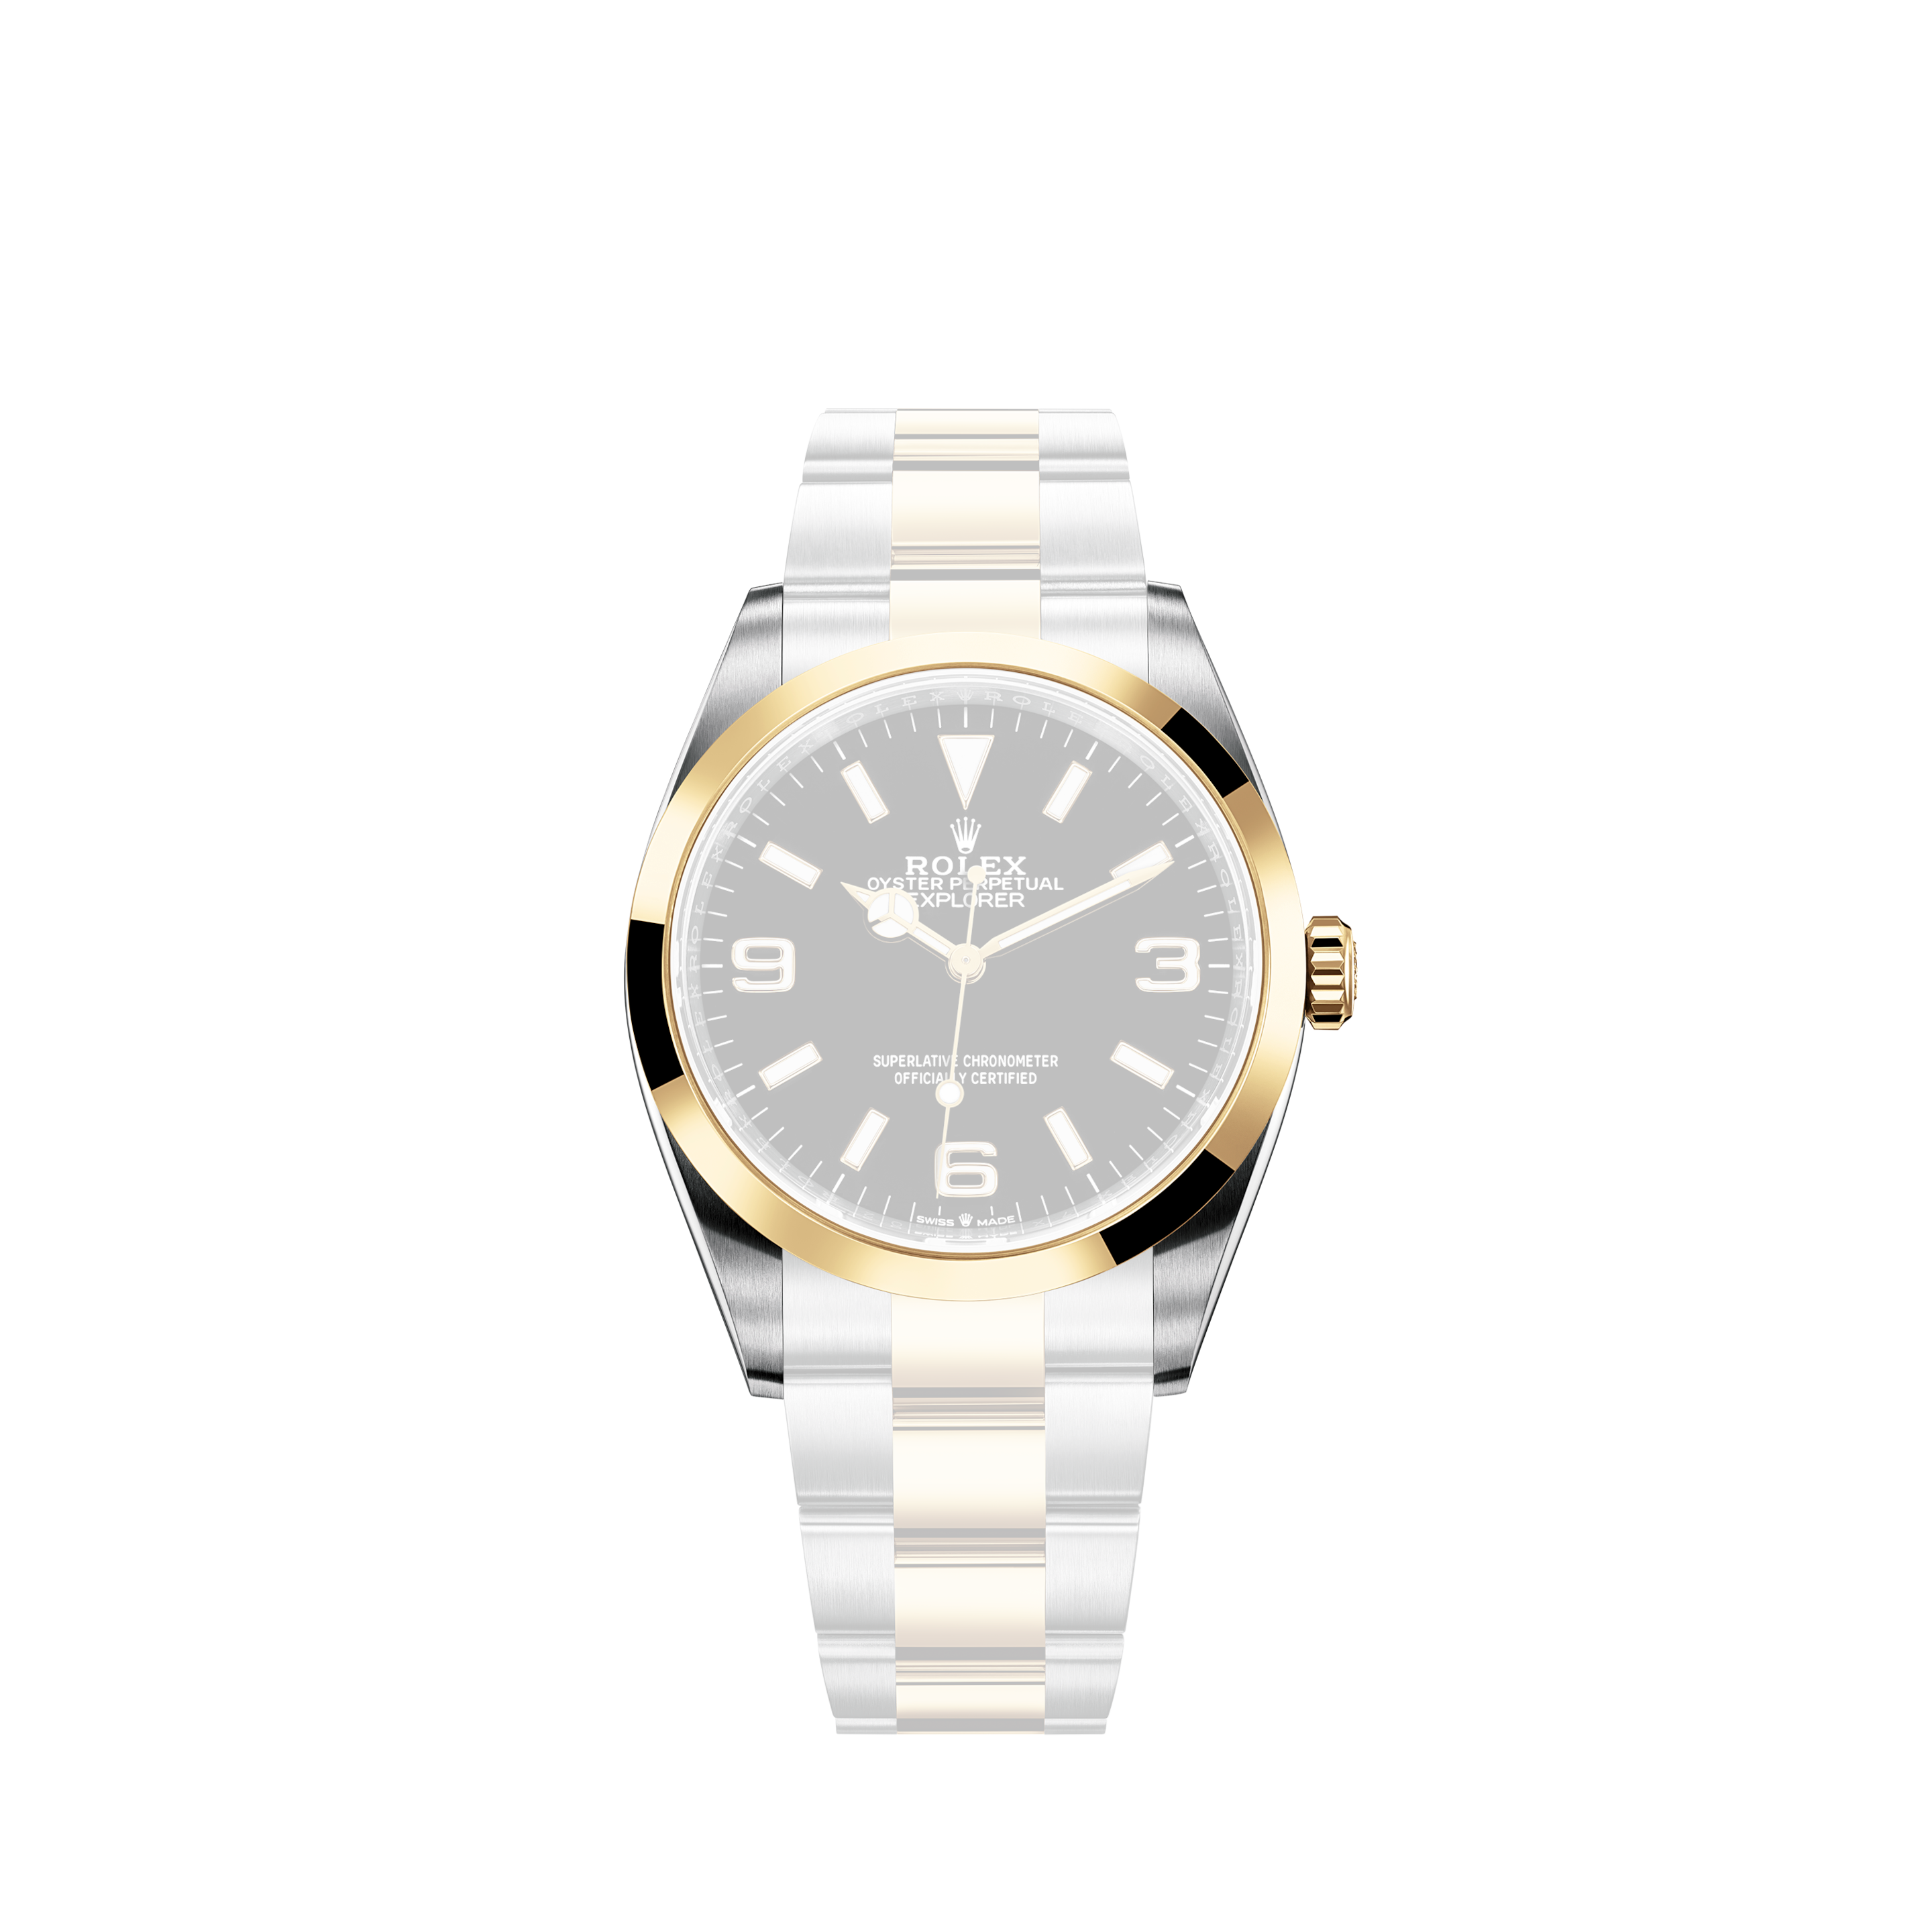 Rolex Oyster Perpetual 124200, Strichindizes, 2020, Ungetragen, Gehäuse Stahl, Band: StahlRolex Oyster Perpetual 124200, Strichindizes, 2021, Ungetragen, Gehäuse Stahl, Band: Stahl